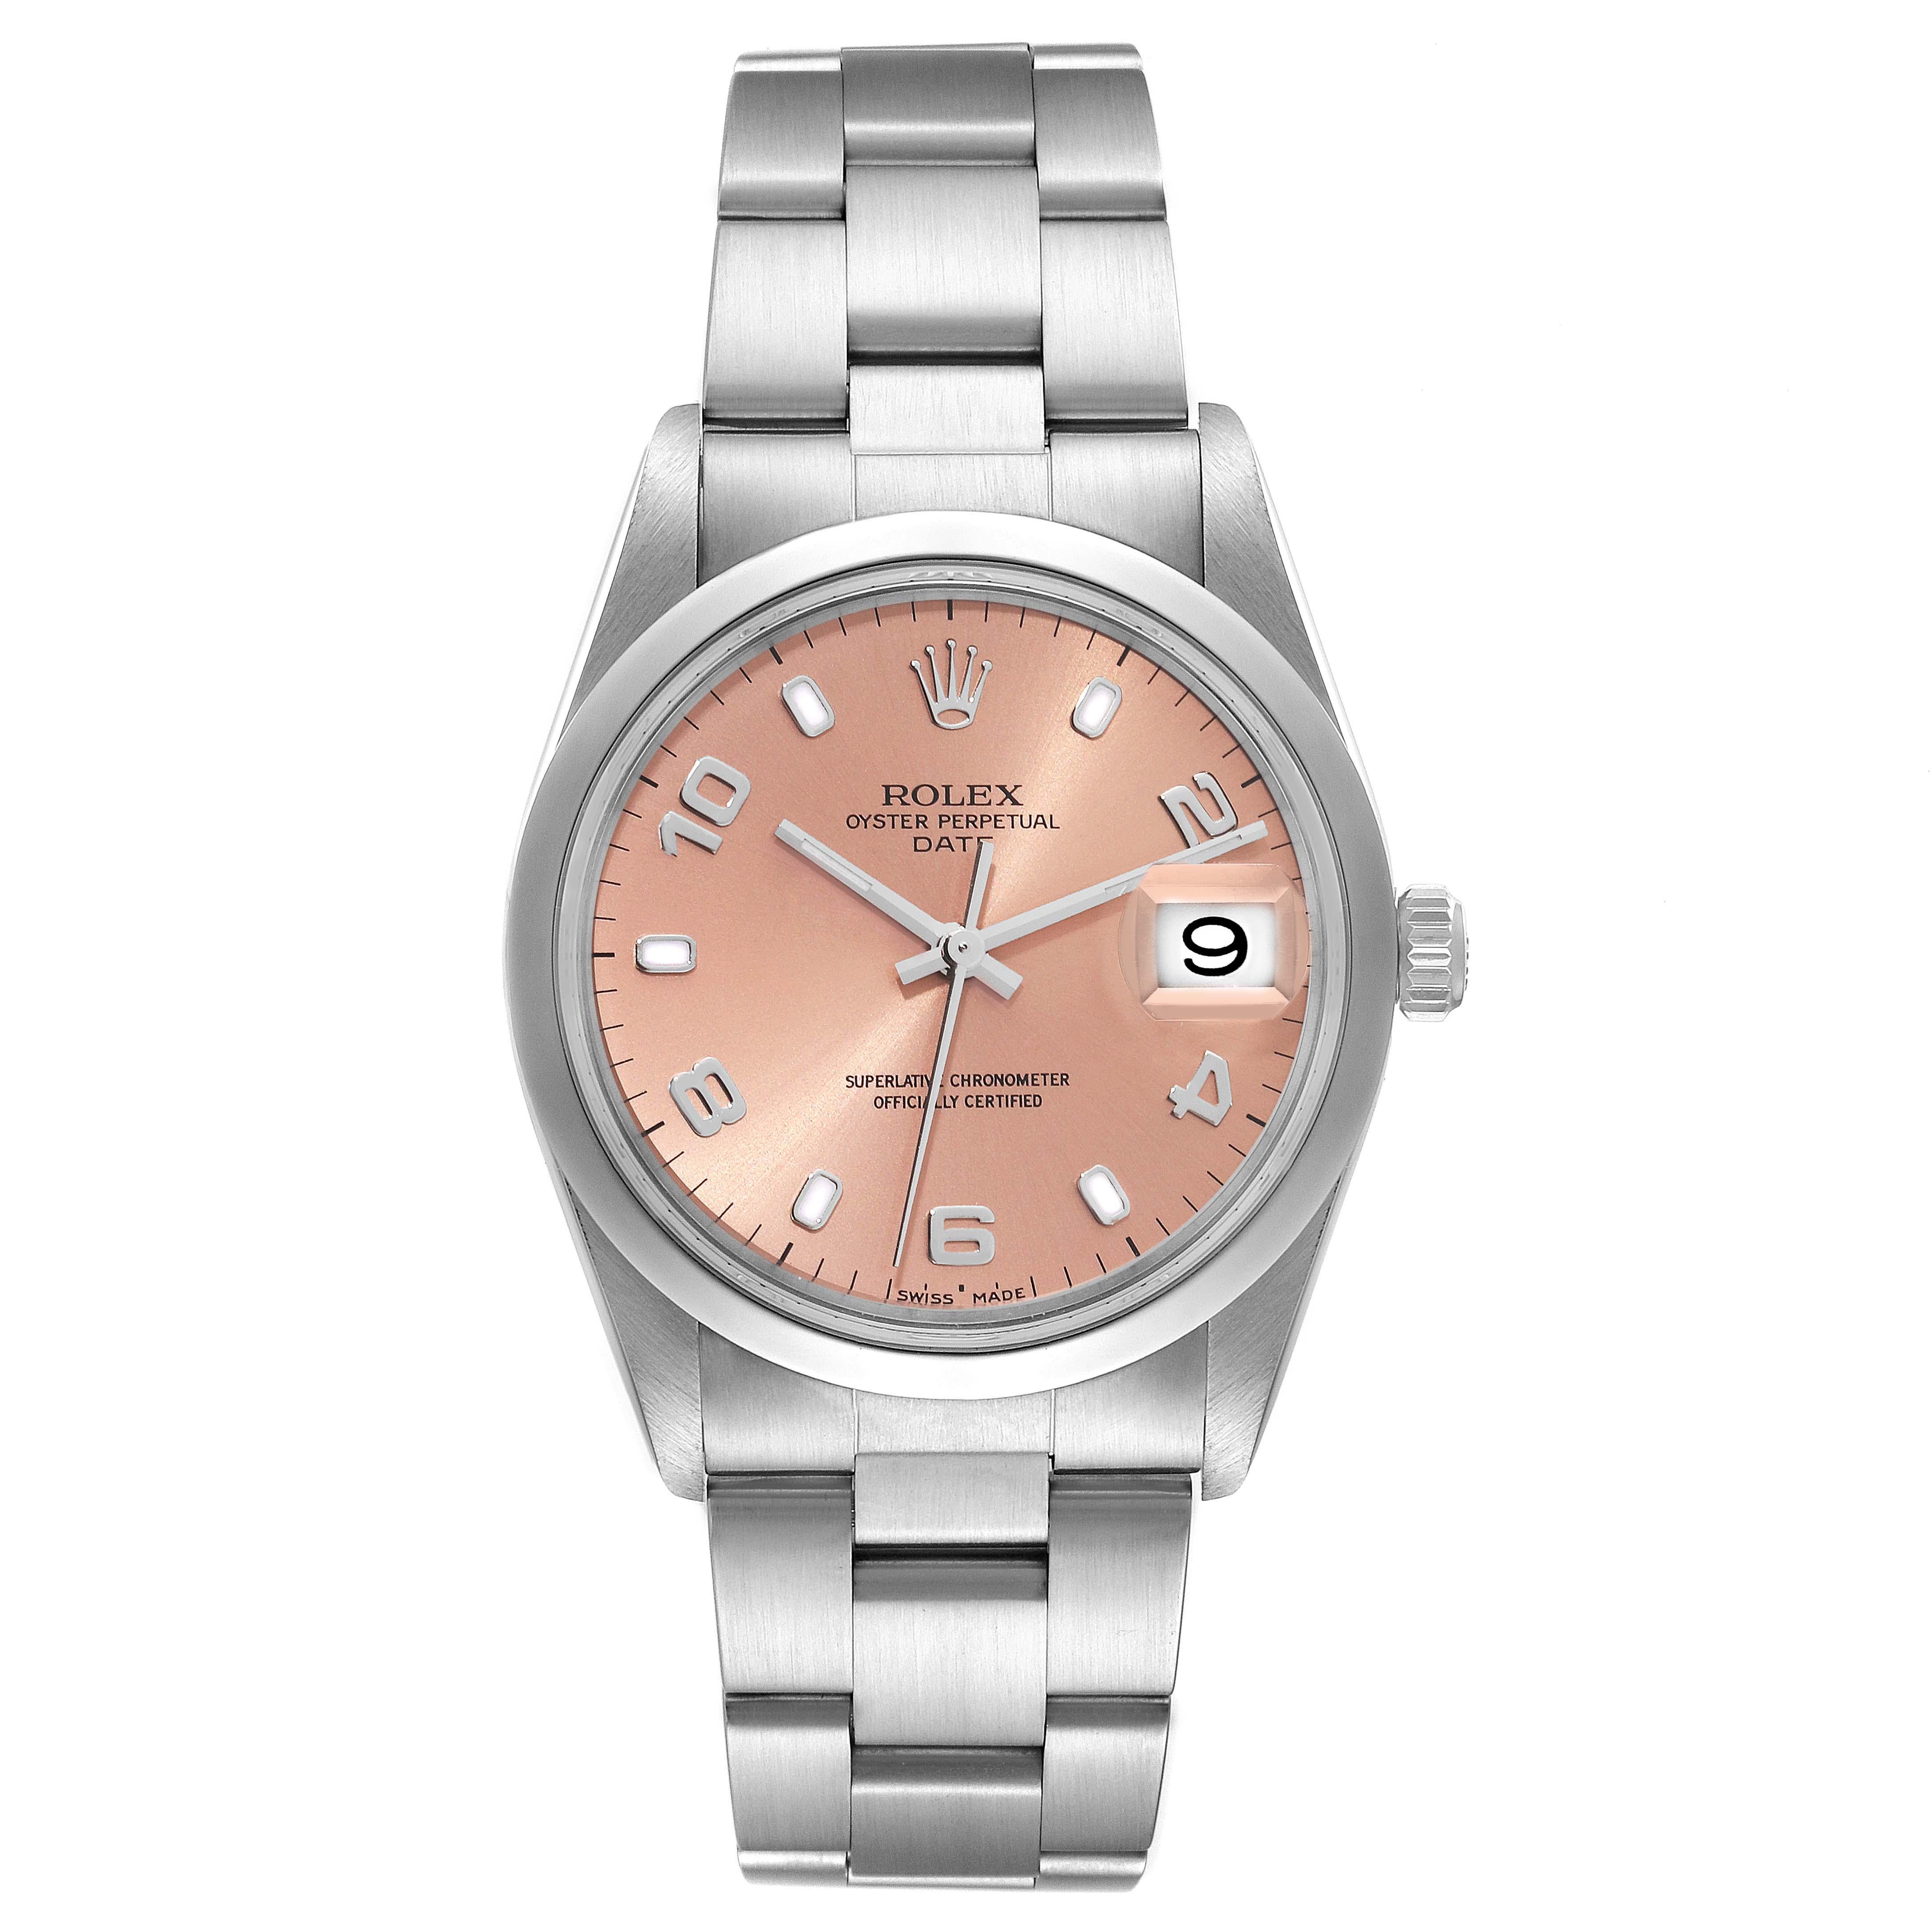 Rolex Date Salmon Dial Smooth Bezel Steel Mens Watch 15200. Officially certified chronometer automatic self-winding movement. Stainless steel oyster case 34.0 mm in diameter. Rolex logo on the crown. Stainless steel smooth bezel. Scratch resistant